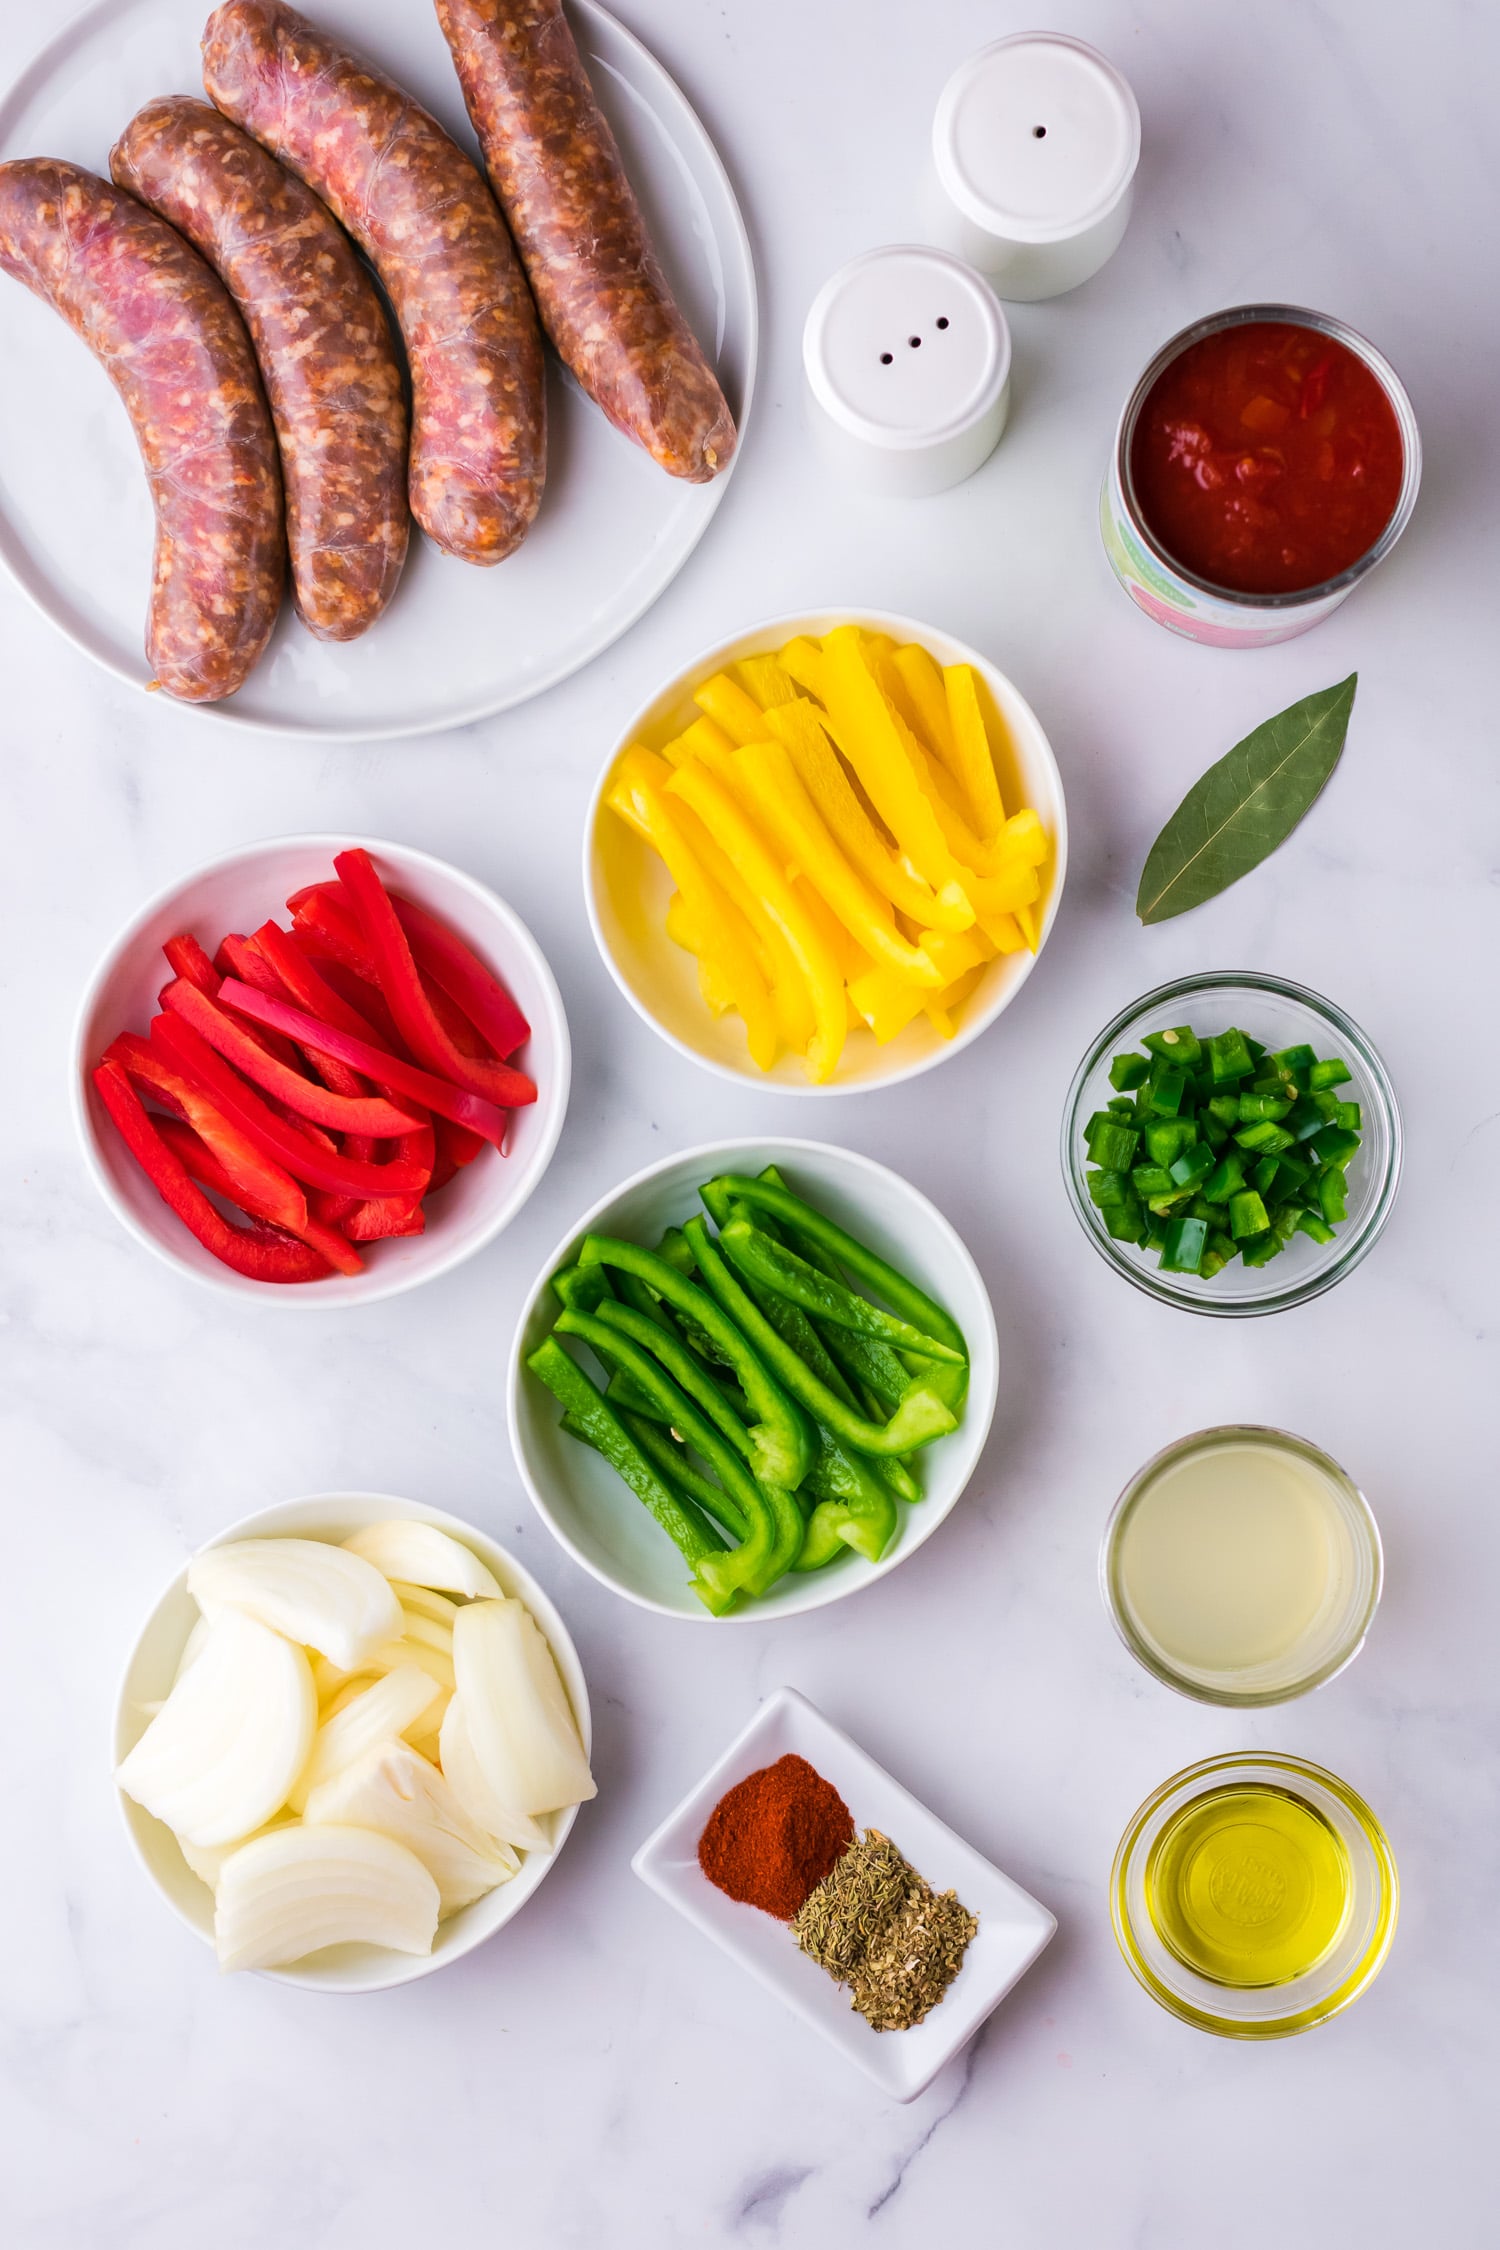 sausage and peppers ingredients